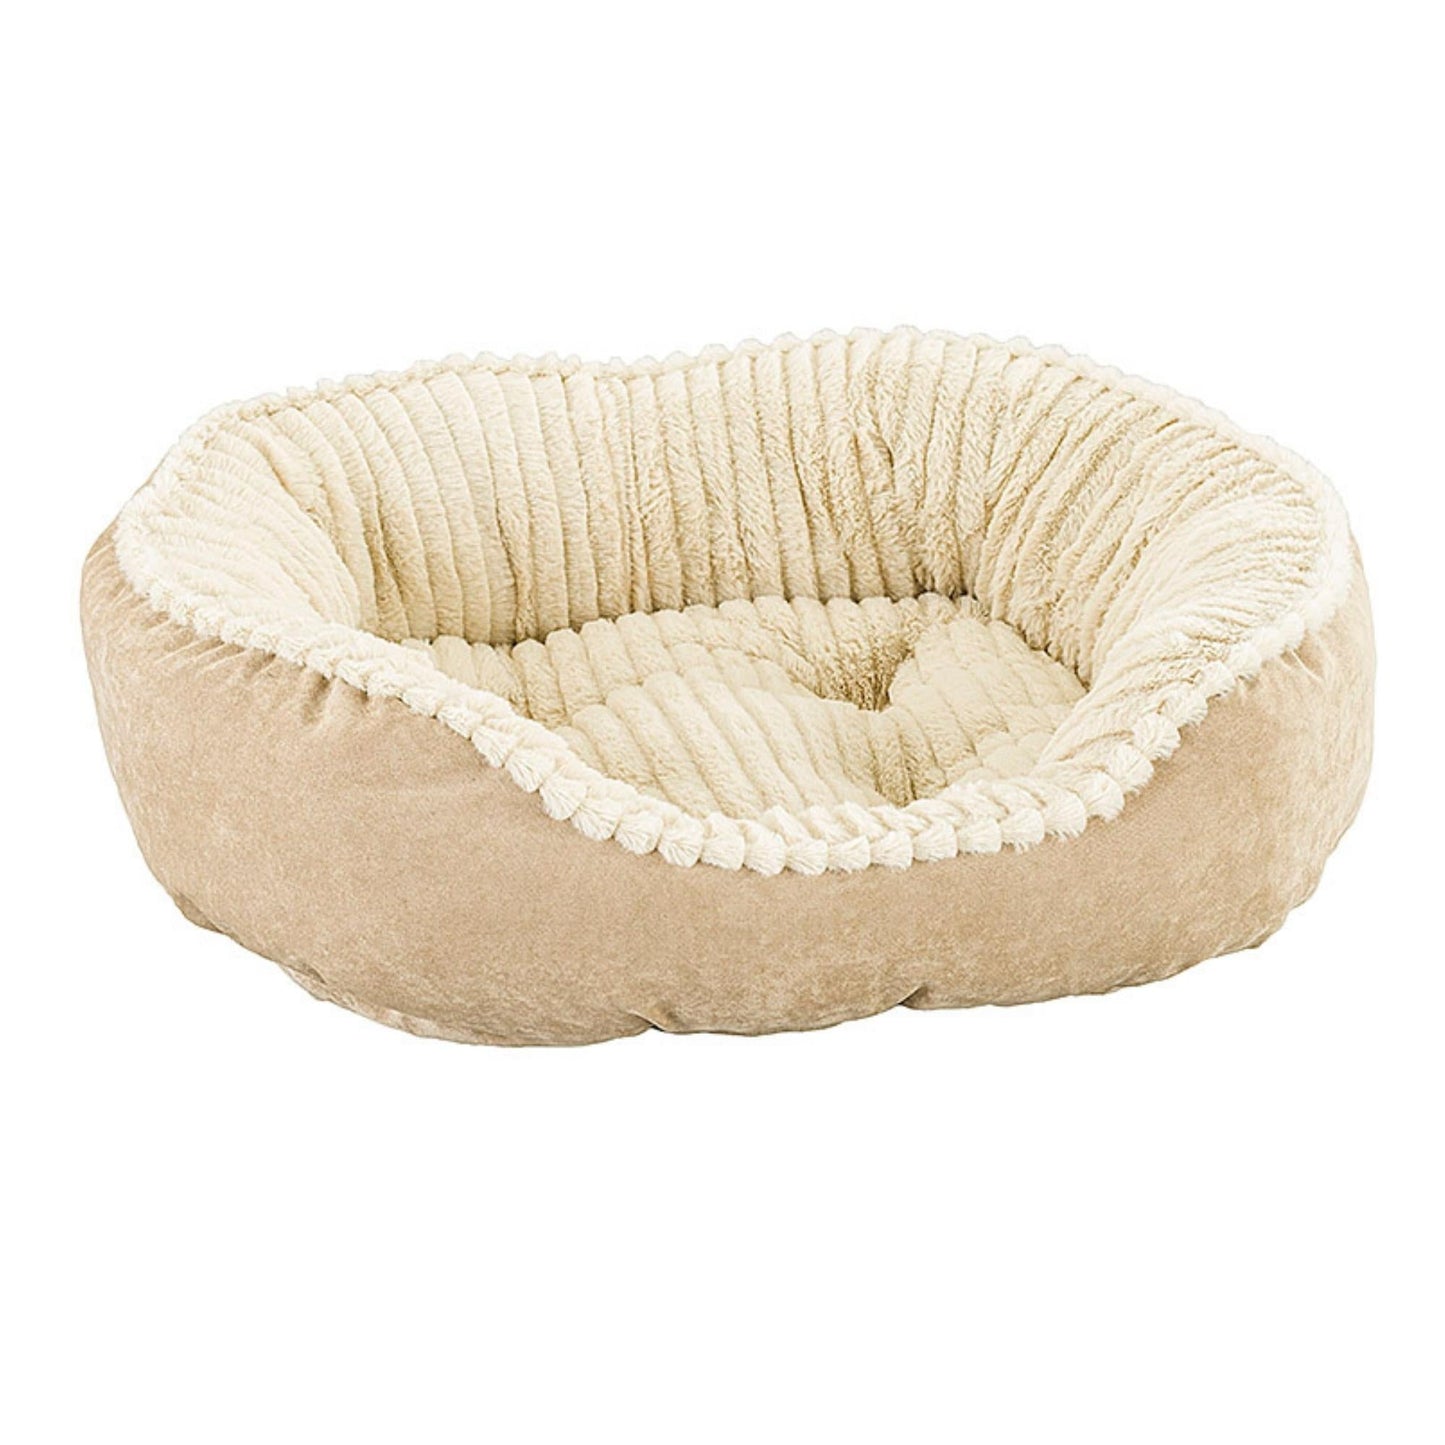 Ethical Pet Sleep Zone Carved Plush 26" Tan